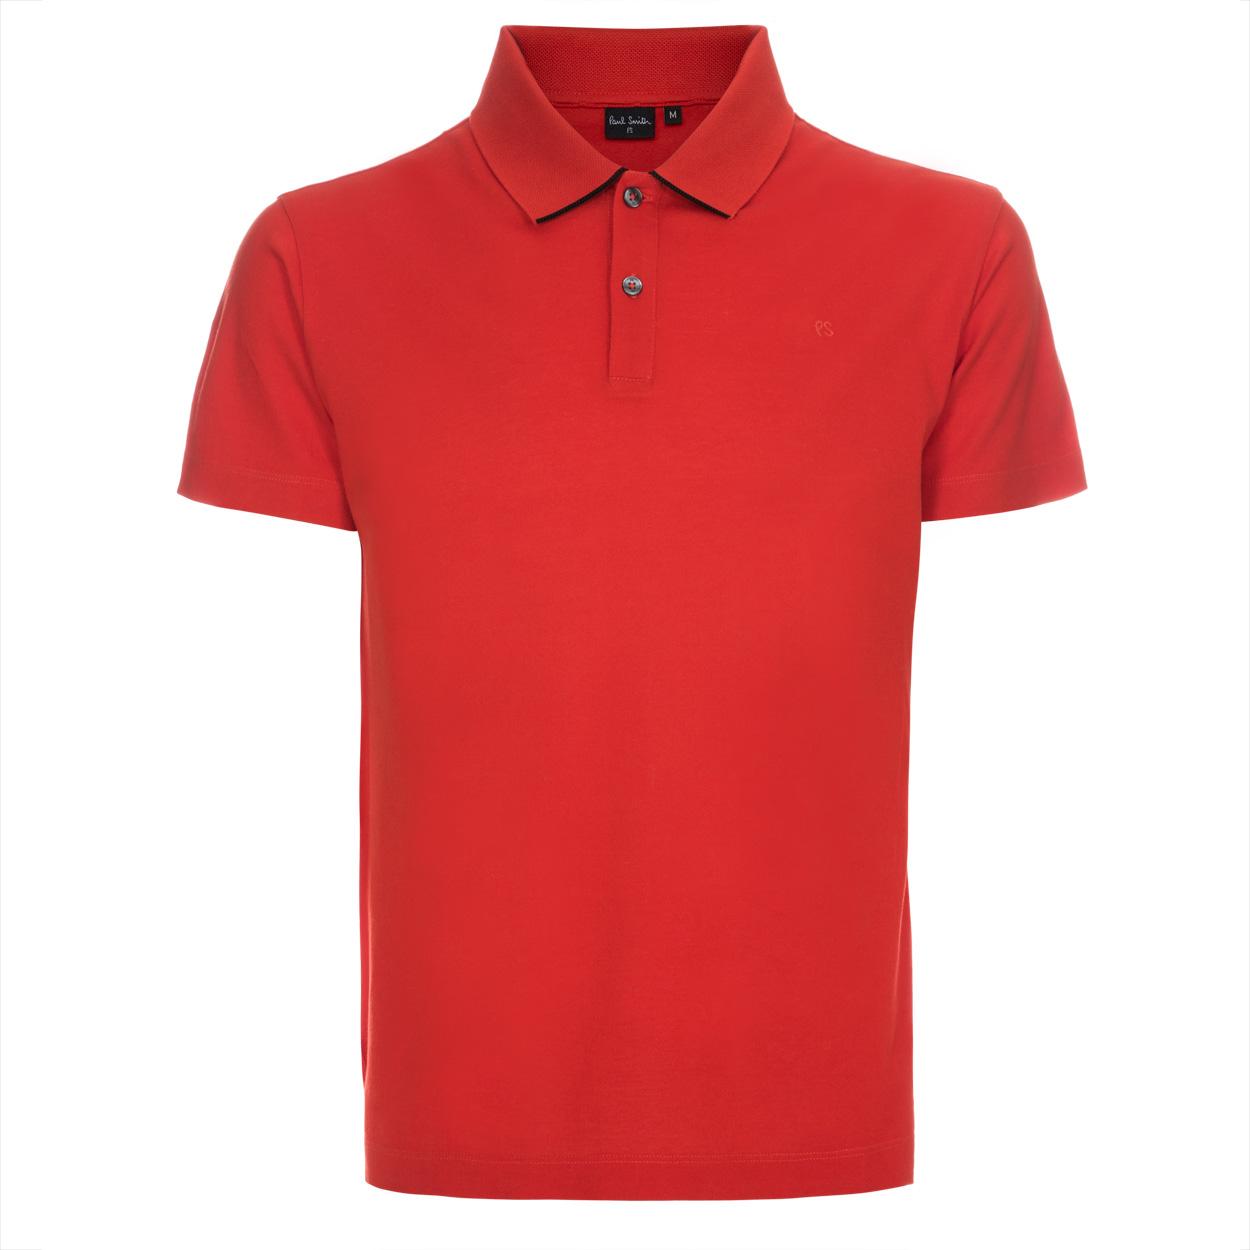 Polo Shirts at Best Price in Chennai | DLM Enterprises